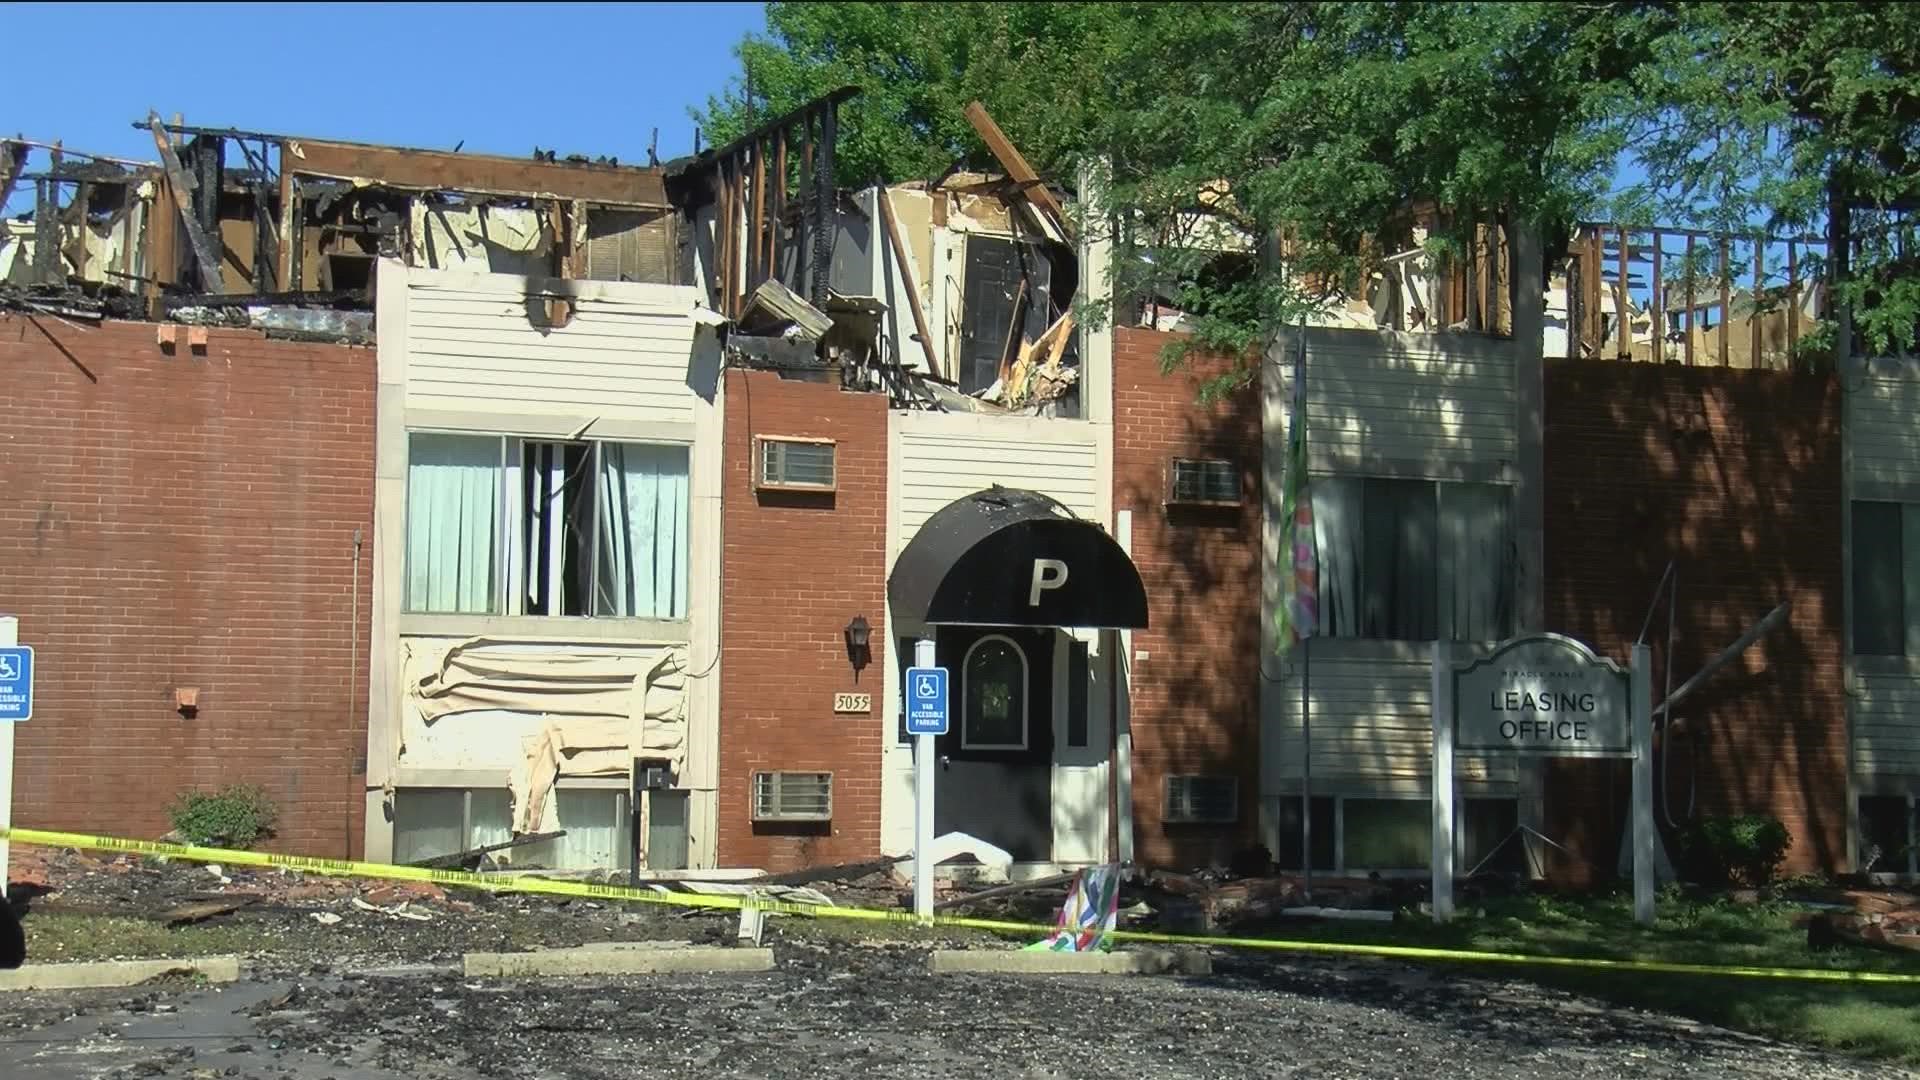 Flames broke out at Miracle Manor Apartments Sunday. Three people were injured, including two firefighters.